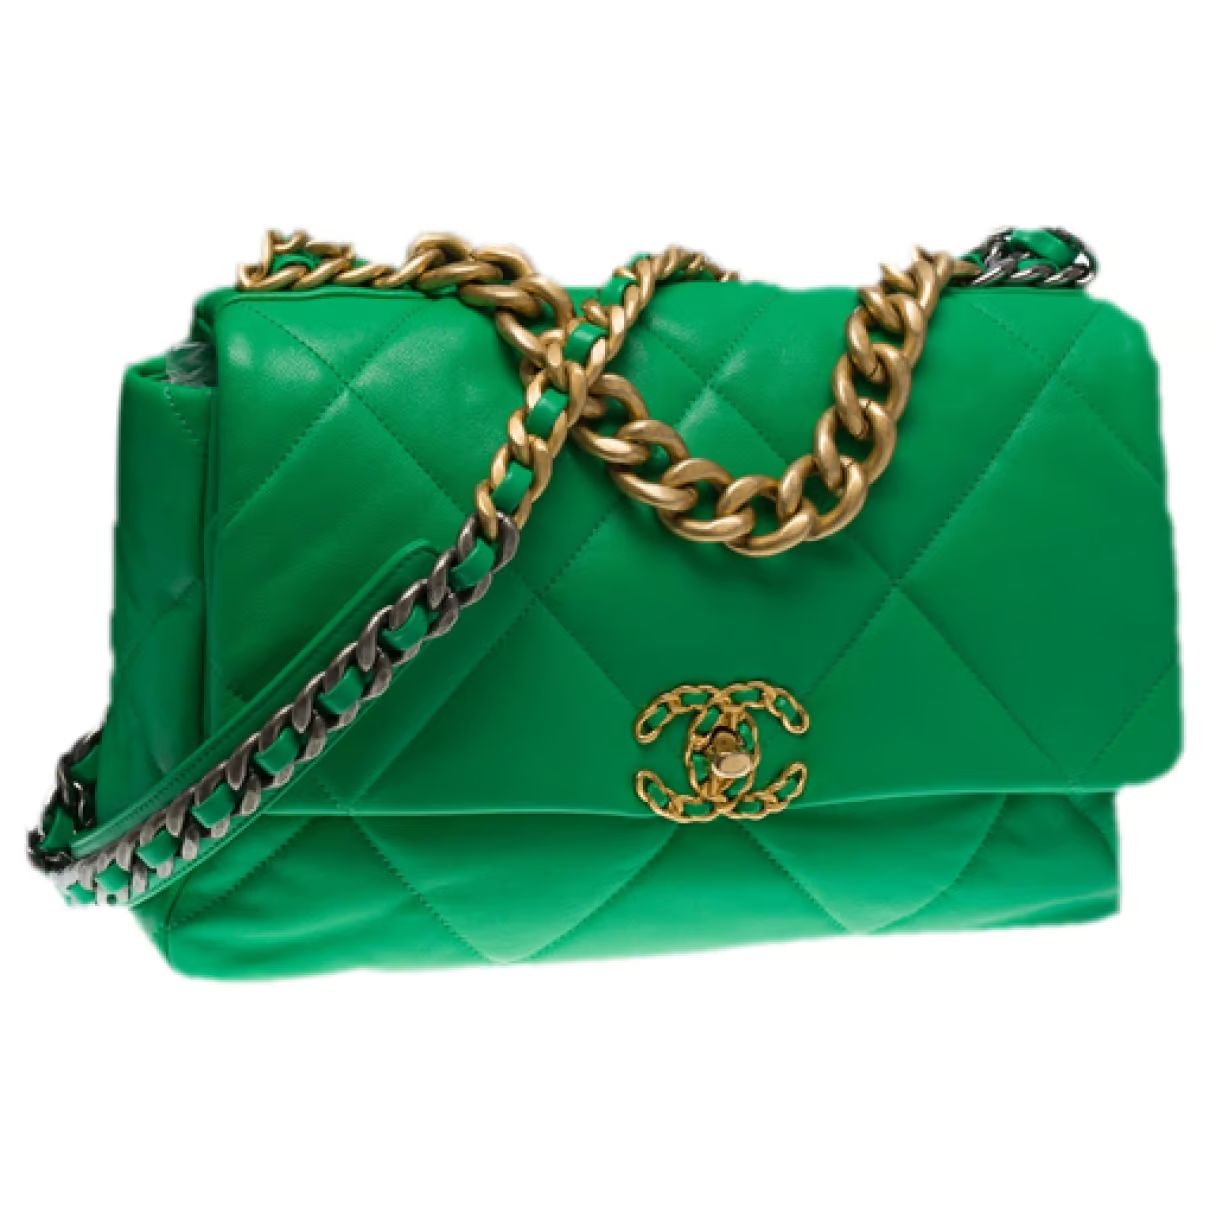 Chanel 19 leather handbag Chanel Green in Leather - 36079529 | Vestiaire Collective (Global)